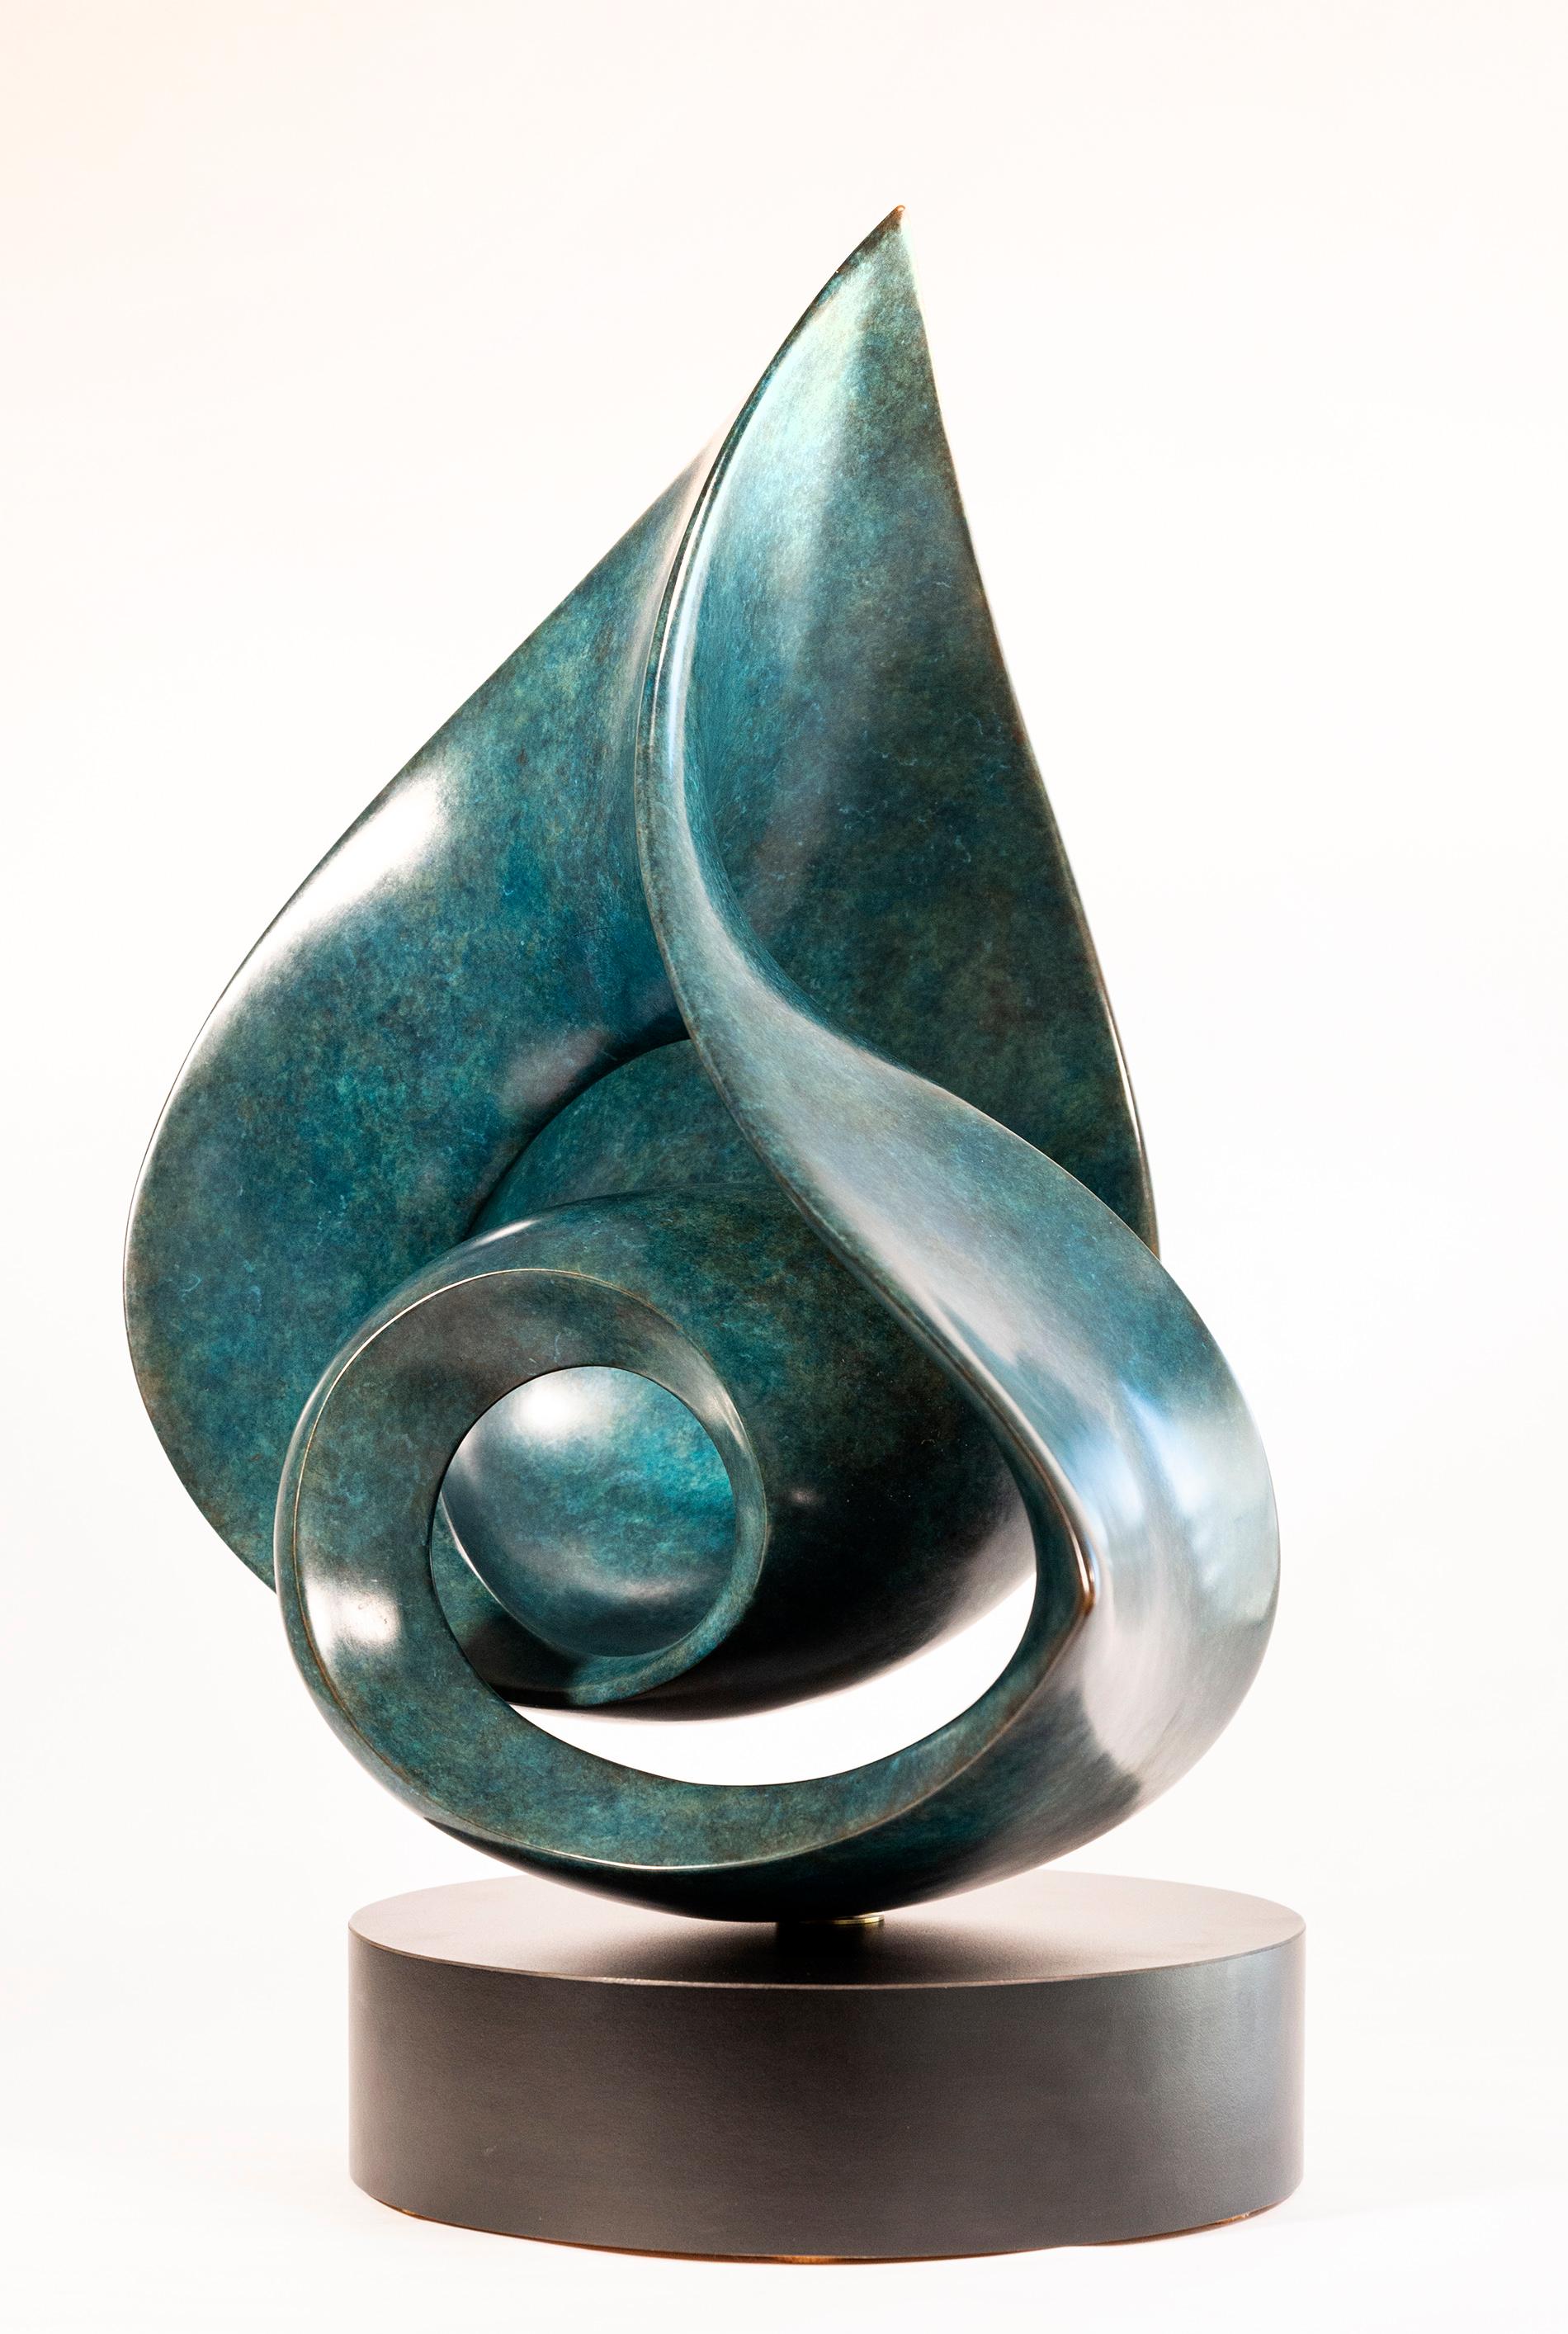 As graceful as a dancer’s form, this contemporary bronze sculpture in a striking deep turquoise patina is by David Chamberlain. Created from one continuous piece, and highly polished, the lustre accentuates the spiralling form and reflects light.